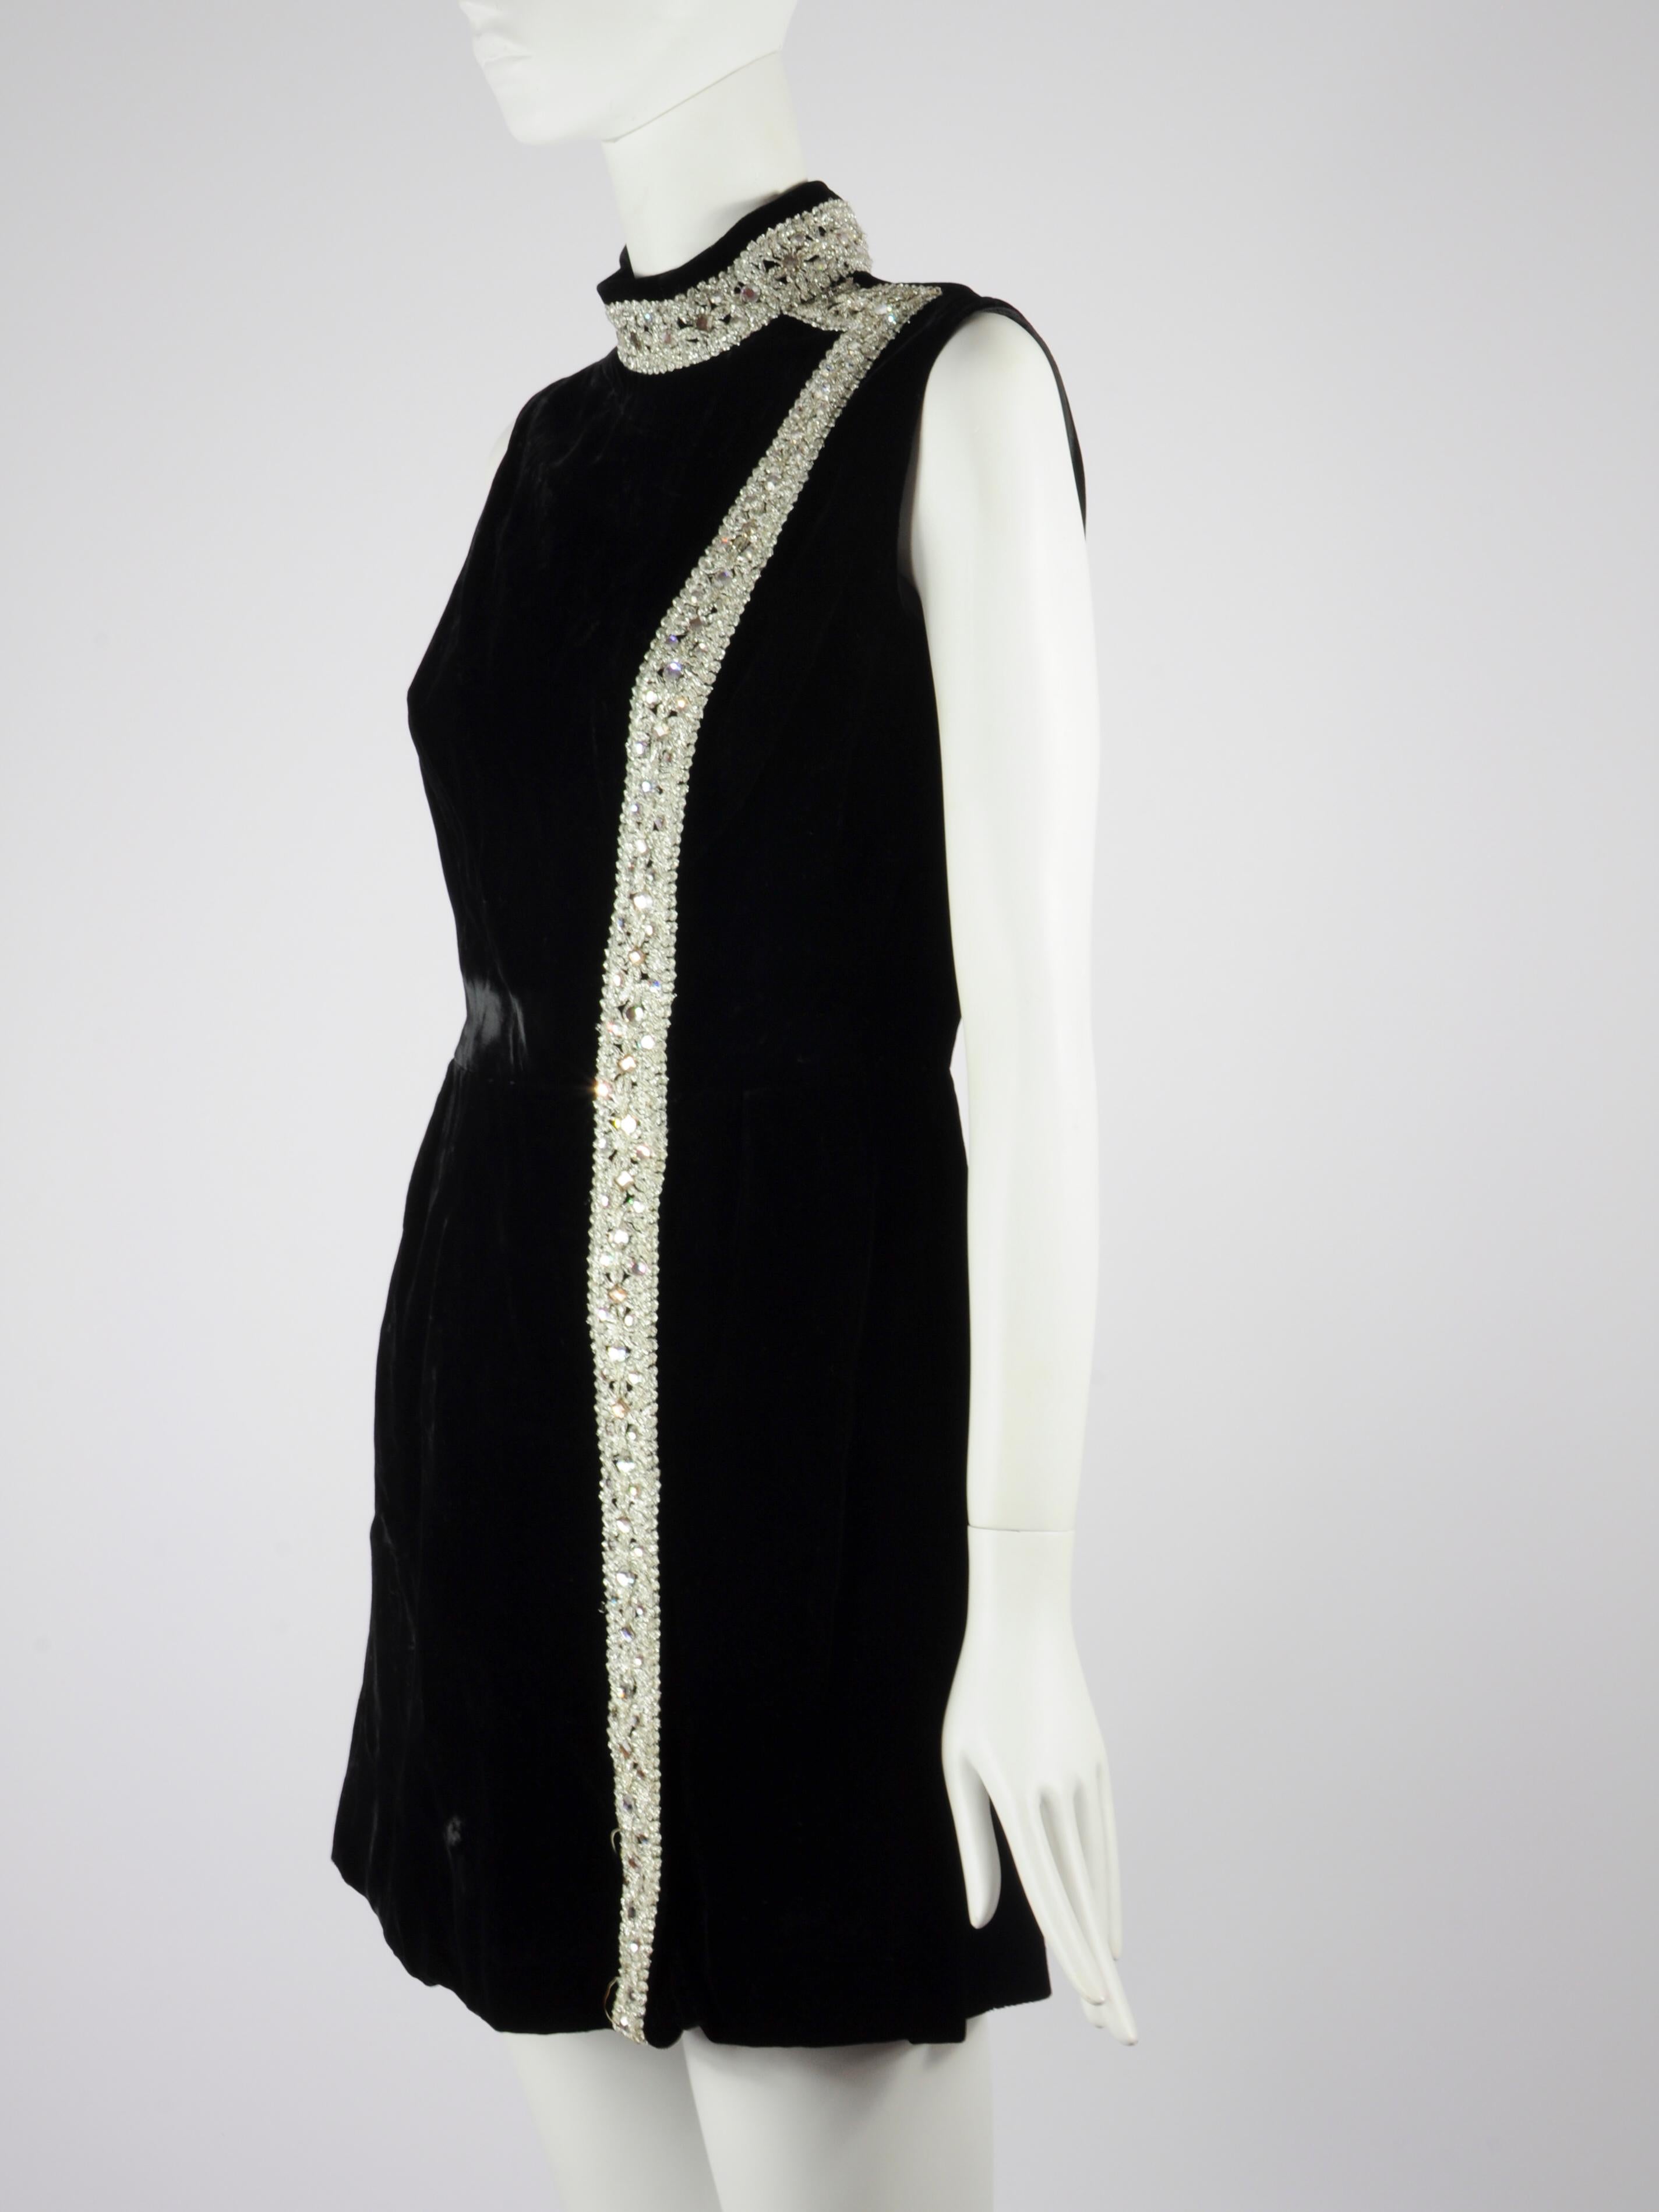 Women's Victor Costa Romantica Velvet Mini Cocktail Dress with Silver Embroidery 1970s